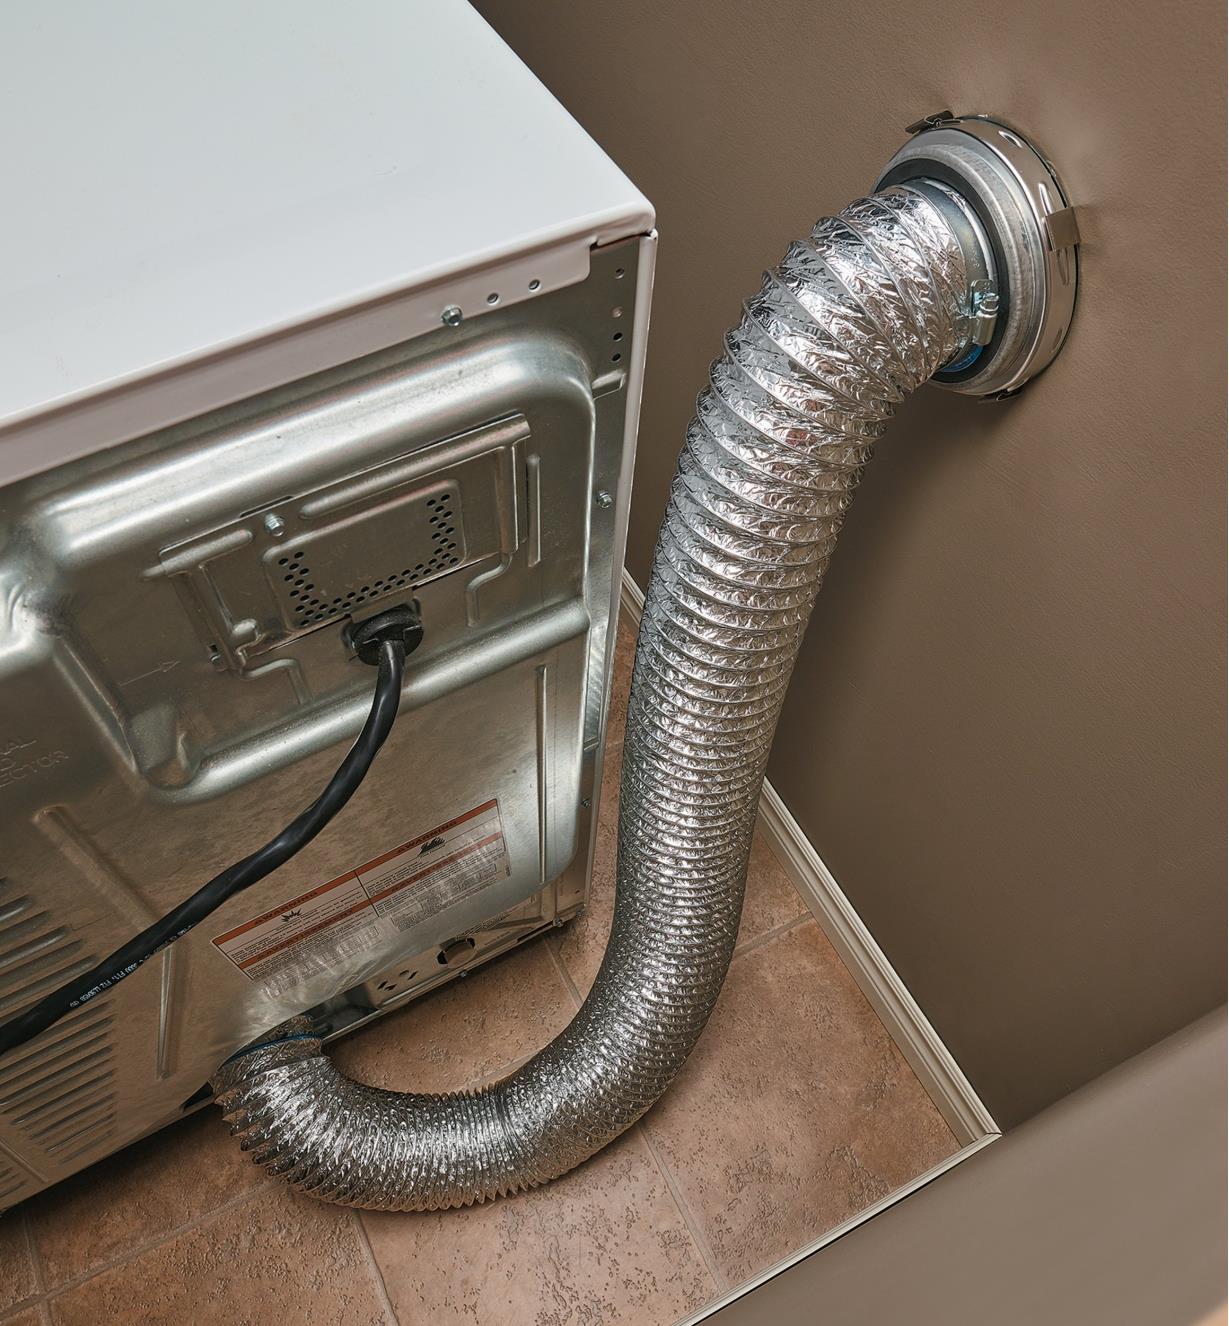 MagVent MV-Flex Dryer Vent Connector connecting a dryer to a wall duct with expandable duct hose